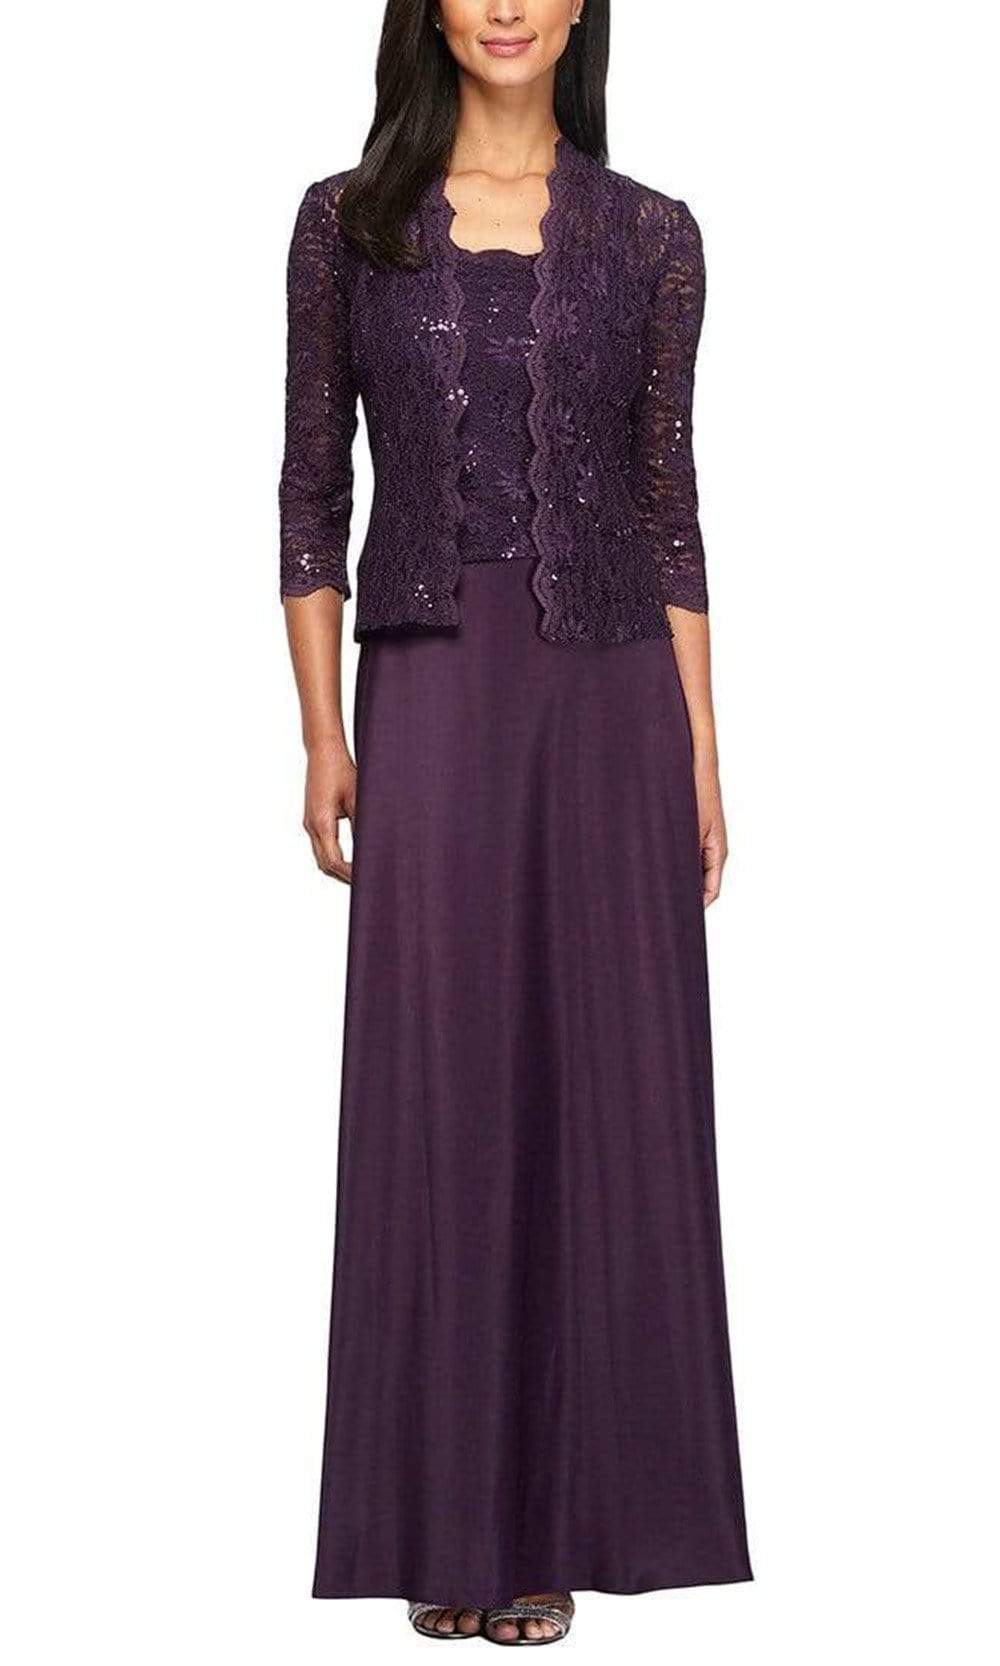 Image of Alex Evenings - 1121198 Lace and Chiffon Dress with Lace Jacket